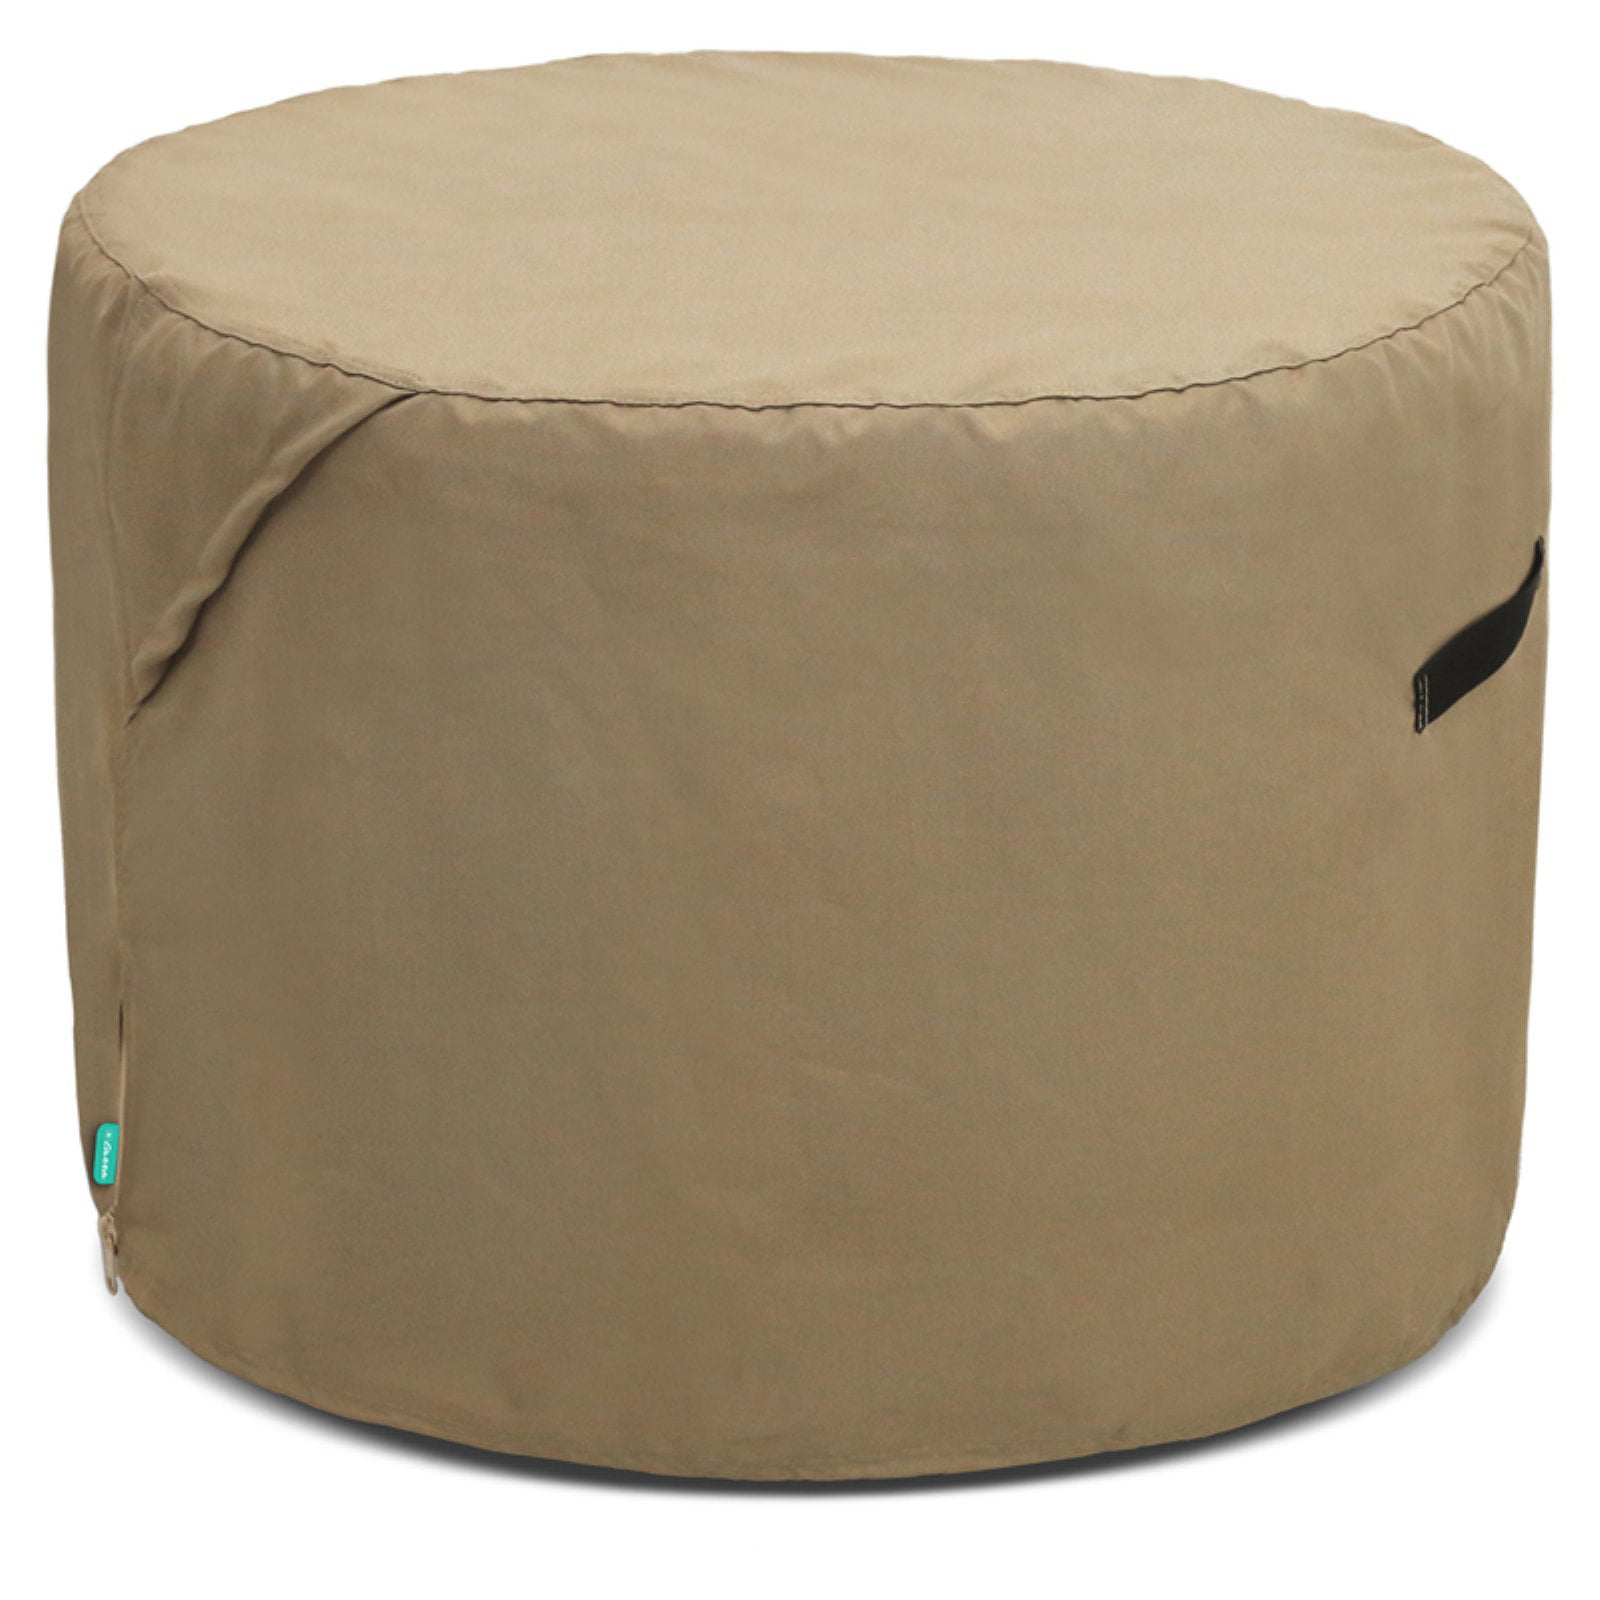 Savannah Protective Outdoor Furniture Ottoman Cover Hunting Green32"x25" 18"drop 